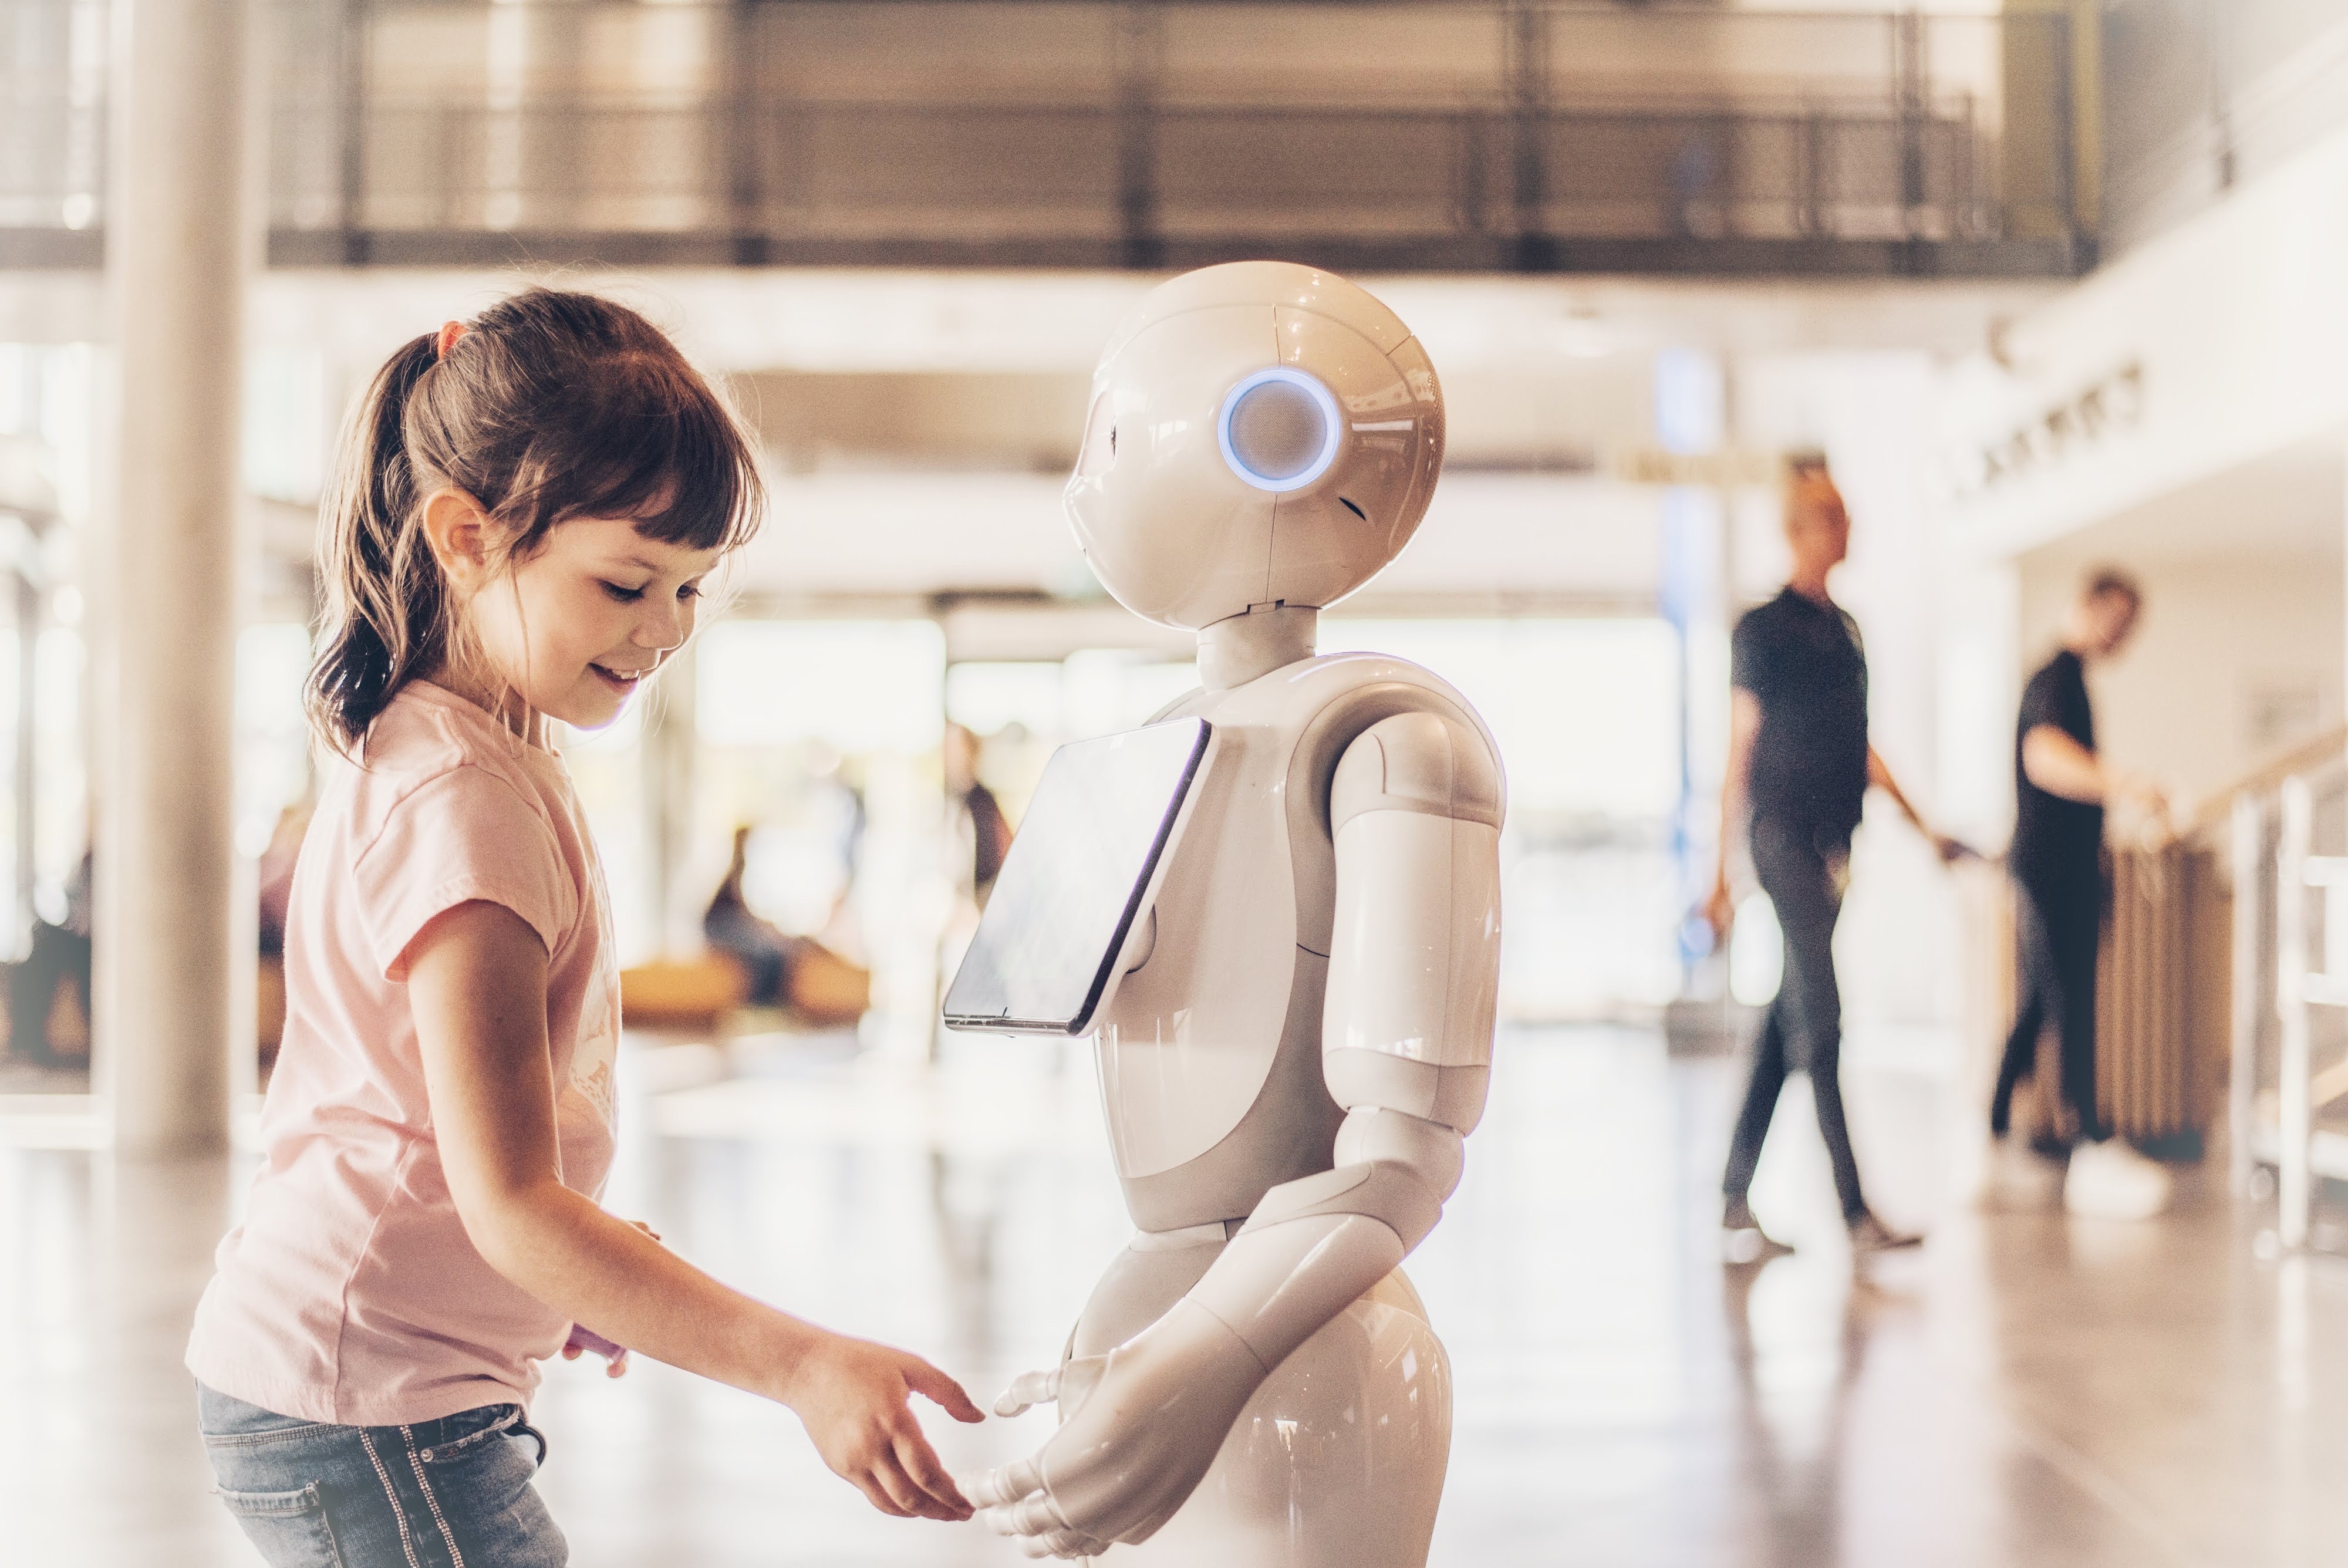 Girl interacting with a robot (source: Envato Elements)